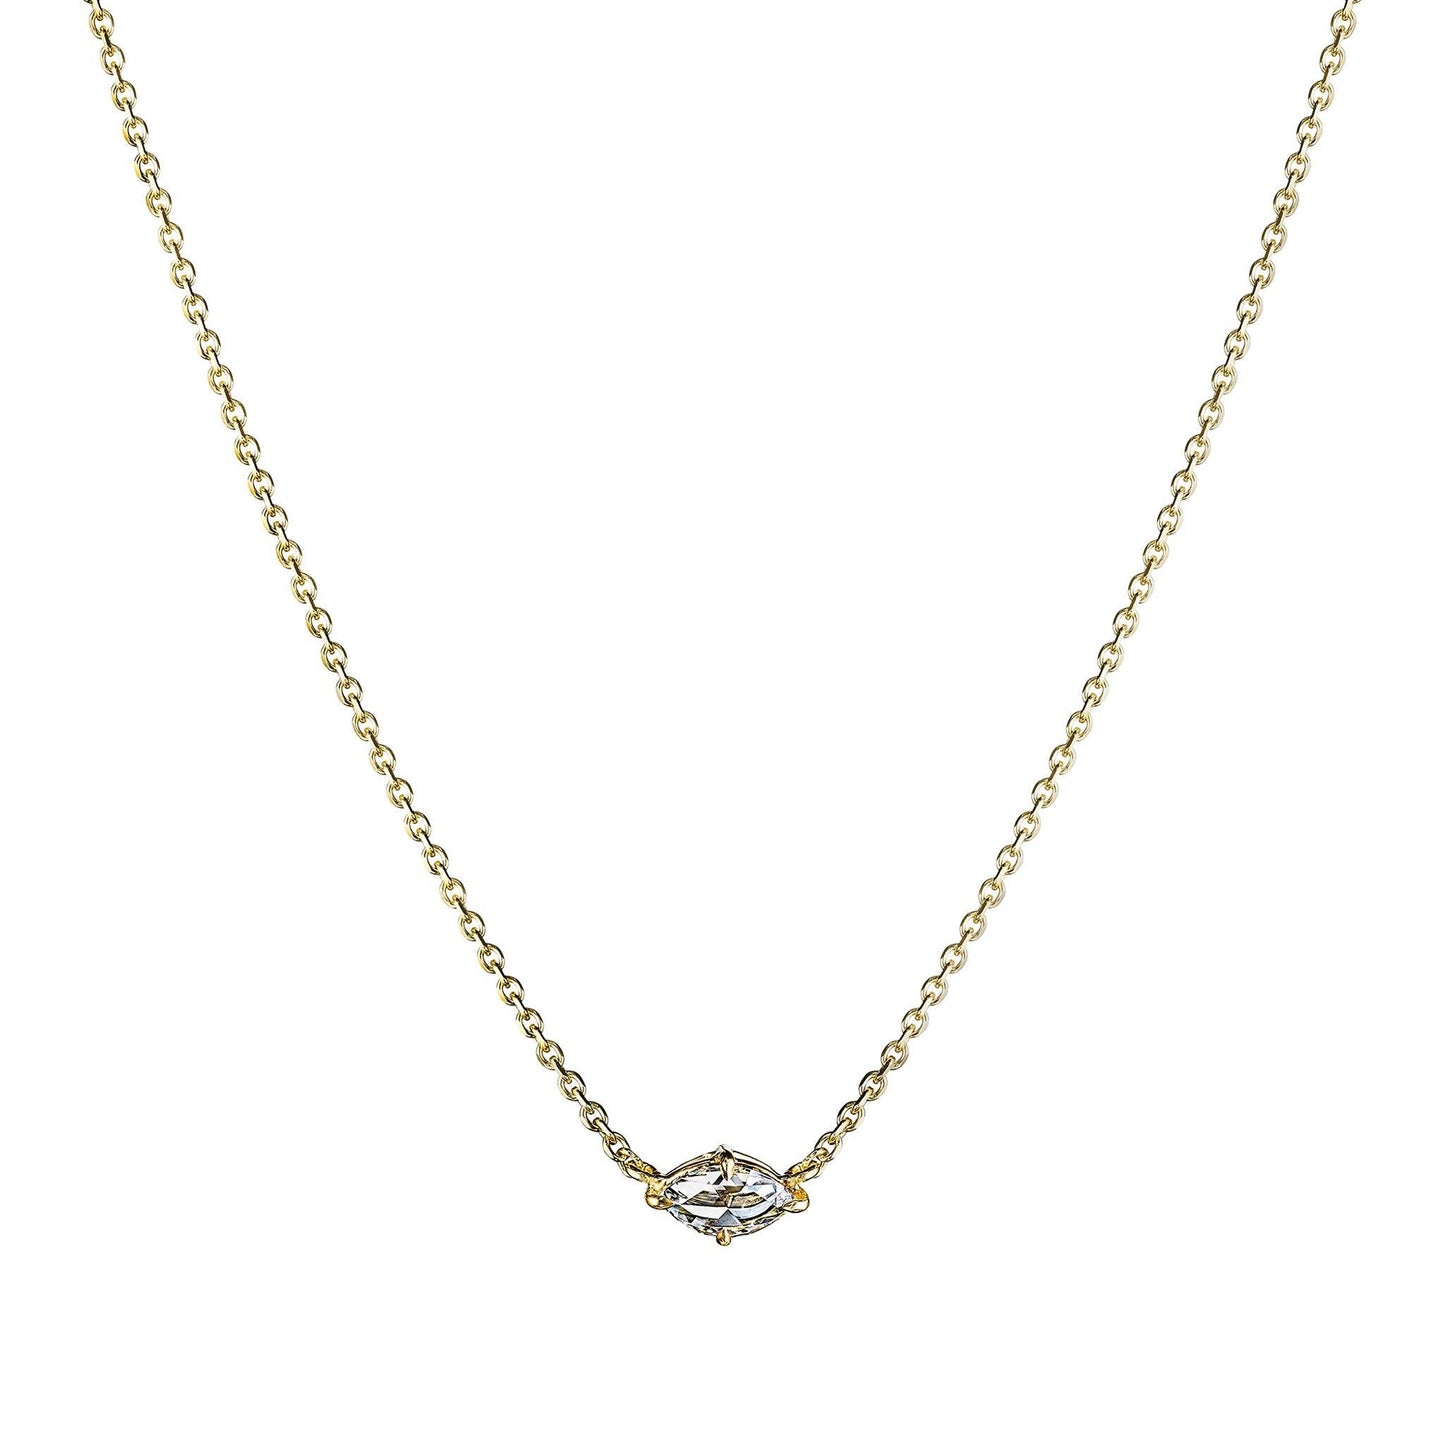 Rose Cut Marquise Diamond Solitaire Necklace